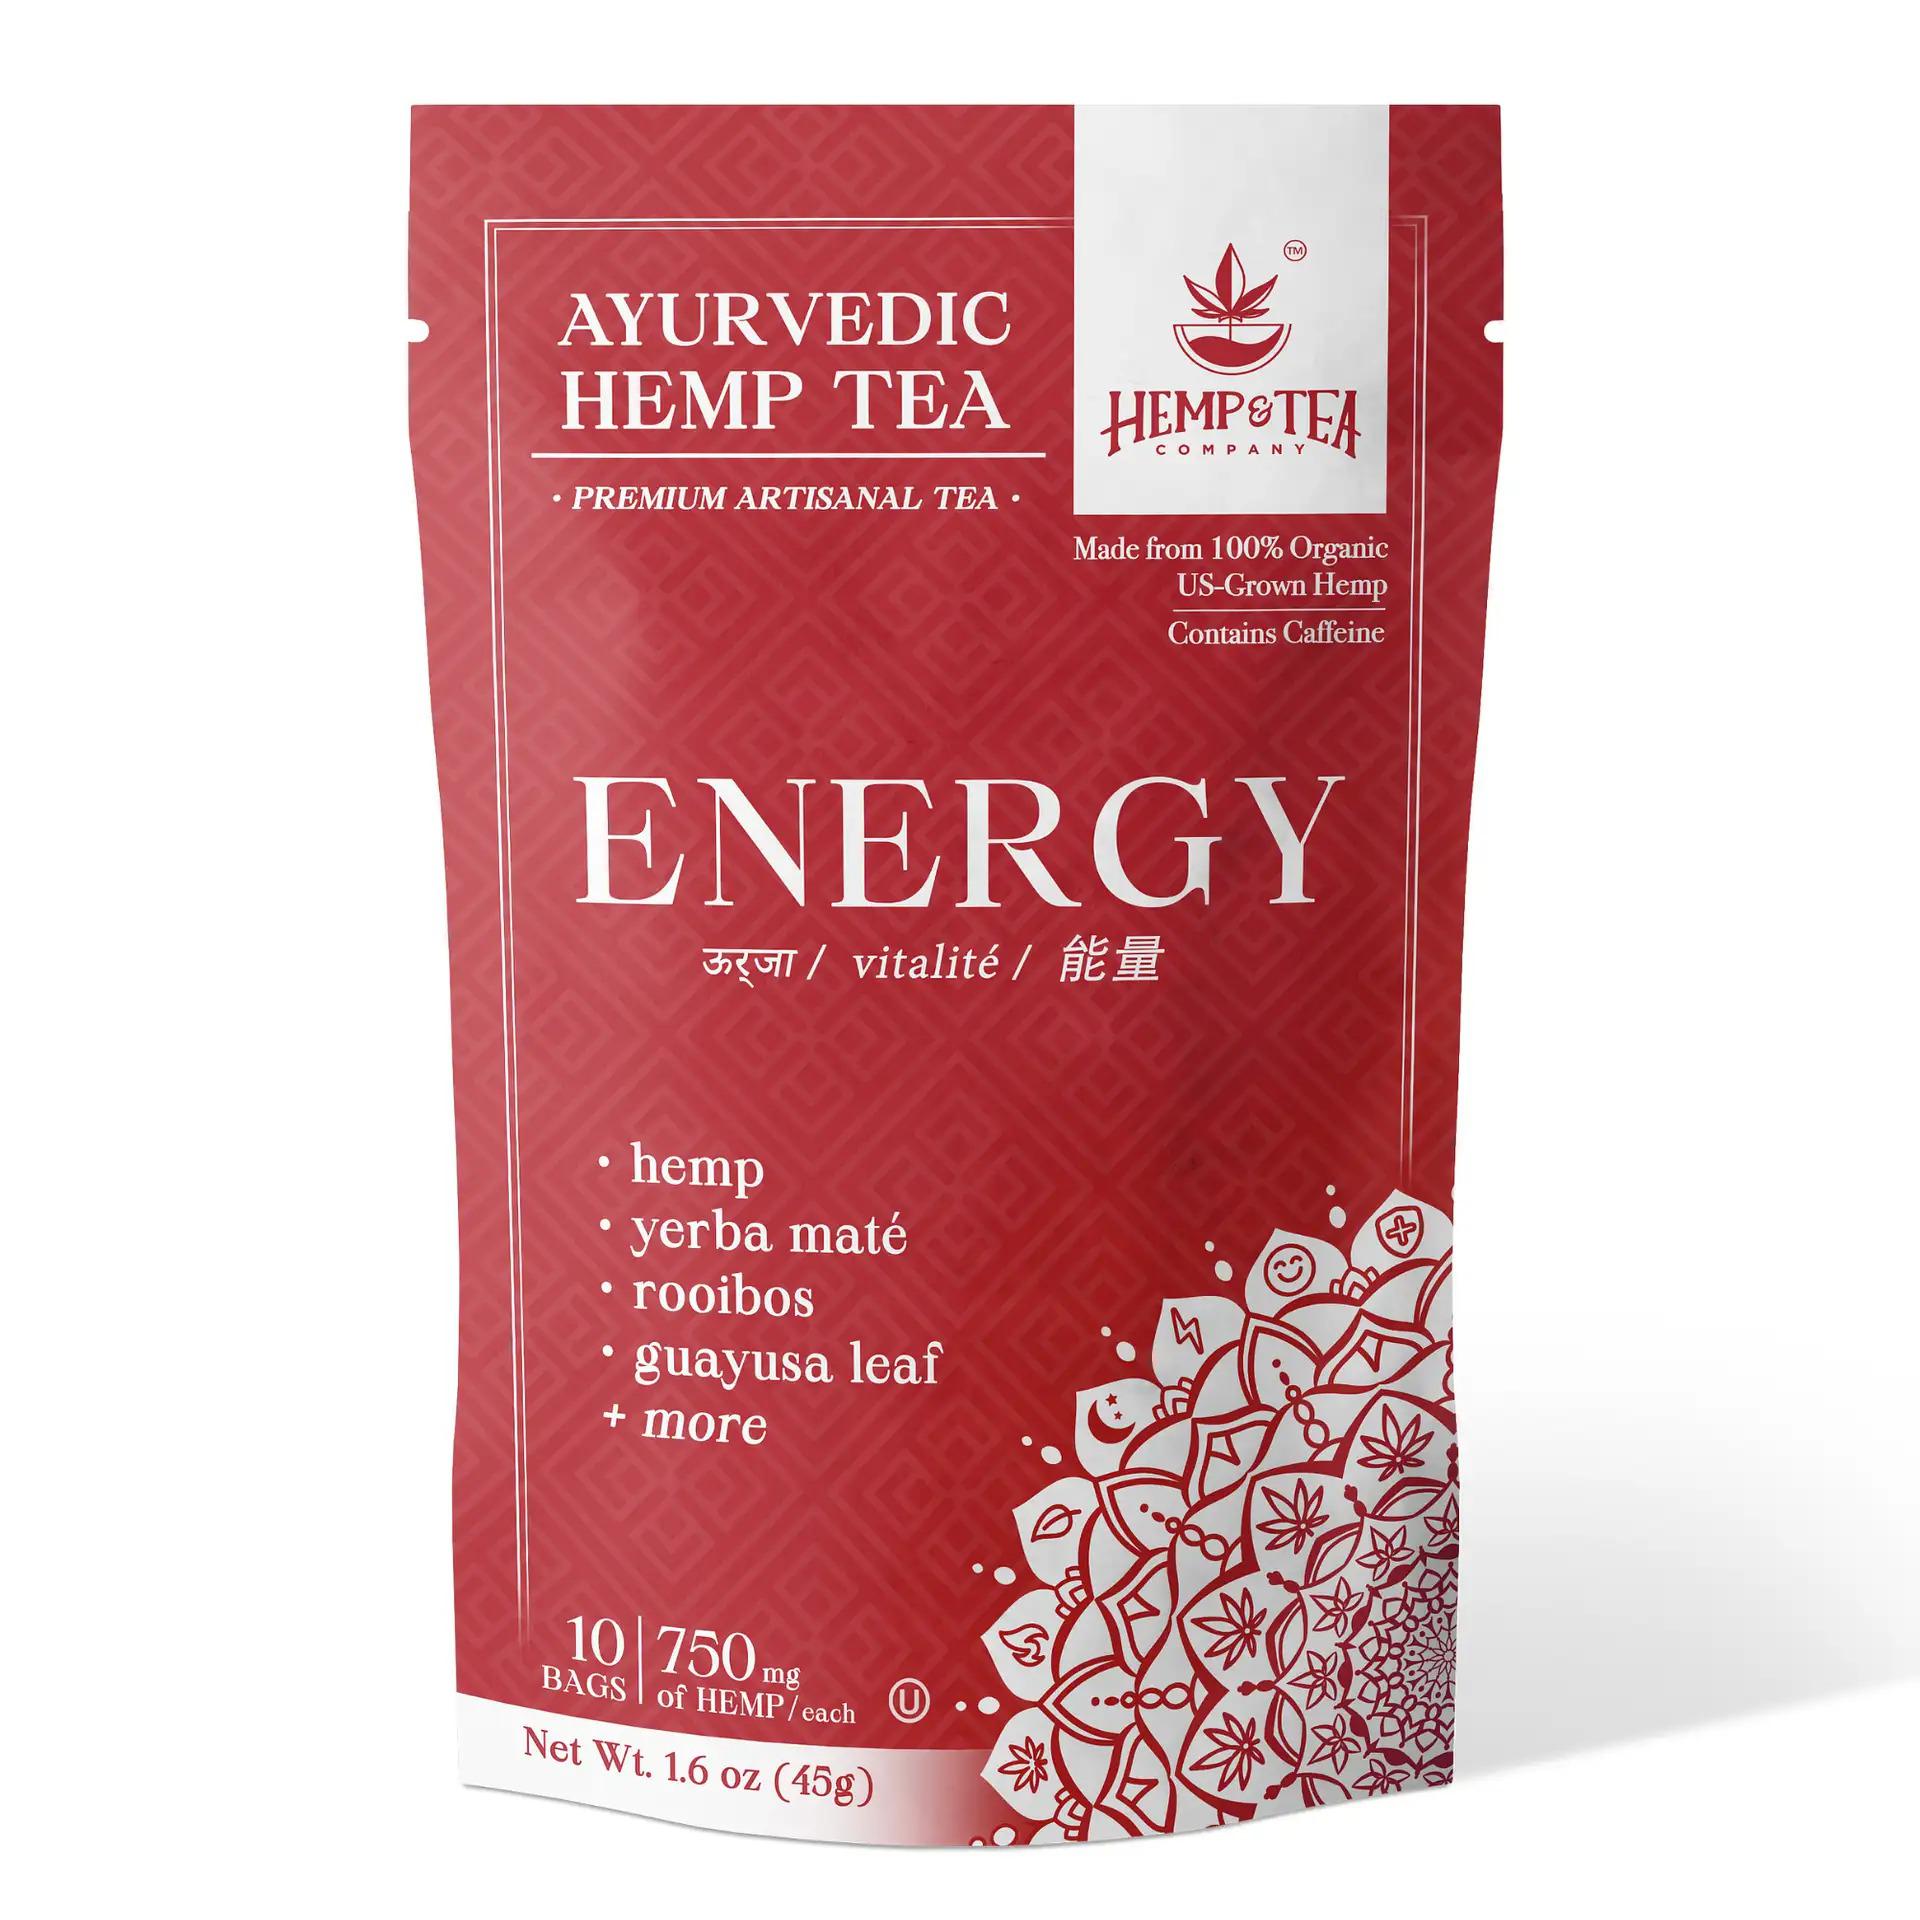 Our Energy blend is designed with our proprietary formulation and has been combined with our balancing Ayurvedic recipe for the fullest effects. This blend contains Yerba Maté, Green Tea, Gotu Kola, and other enriching herbs, which have been known for centuries to restore fatigue while delivering a natural and grounded energy boost. With the Yerba Maté and Green Tea base, each tea bag contains approximately 25mg of gentle, slow-acting caffeine. One package contains 10 hand-packed tea bags, each with 750mg hemp.